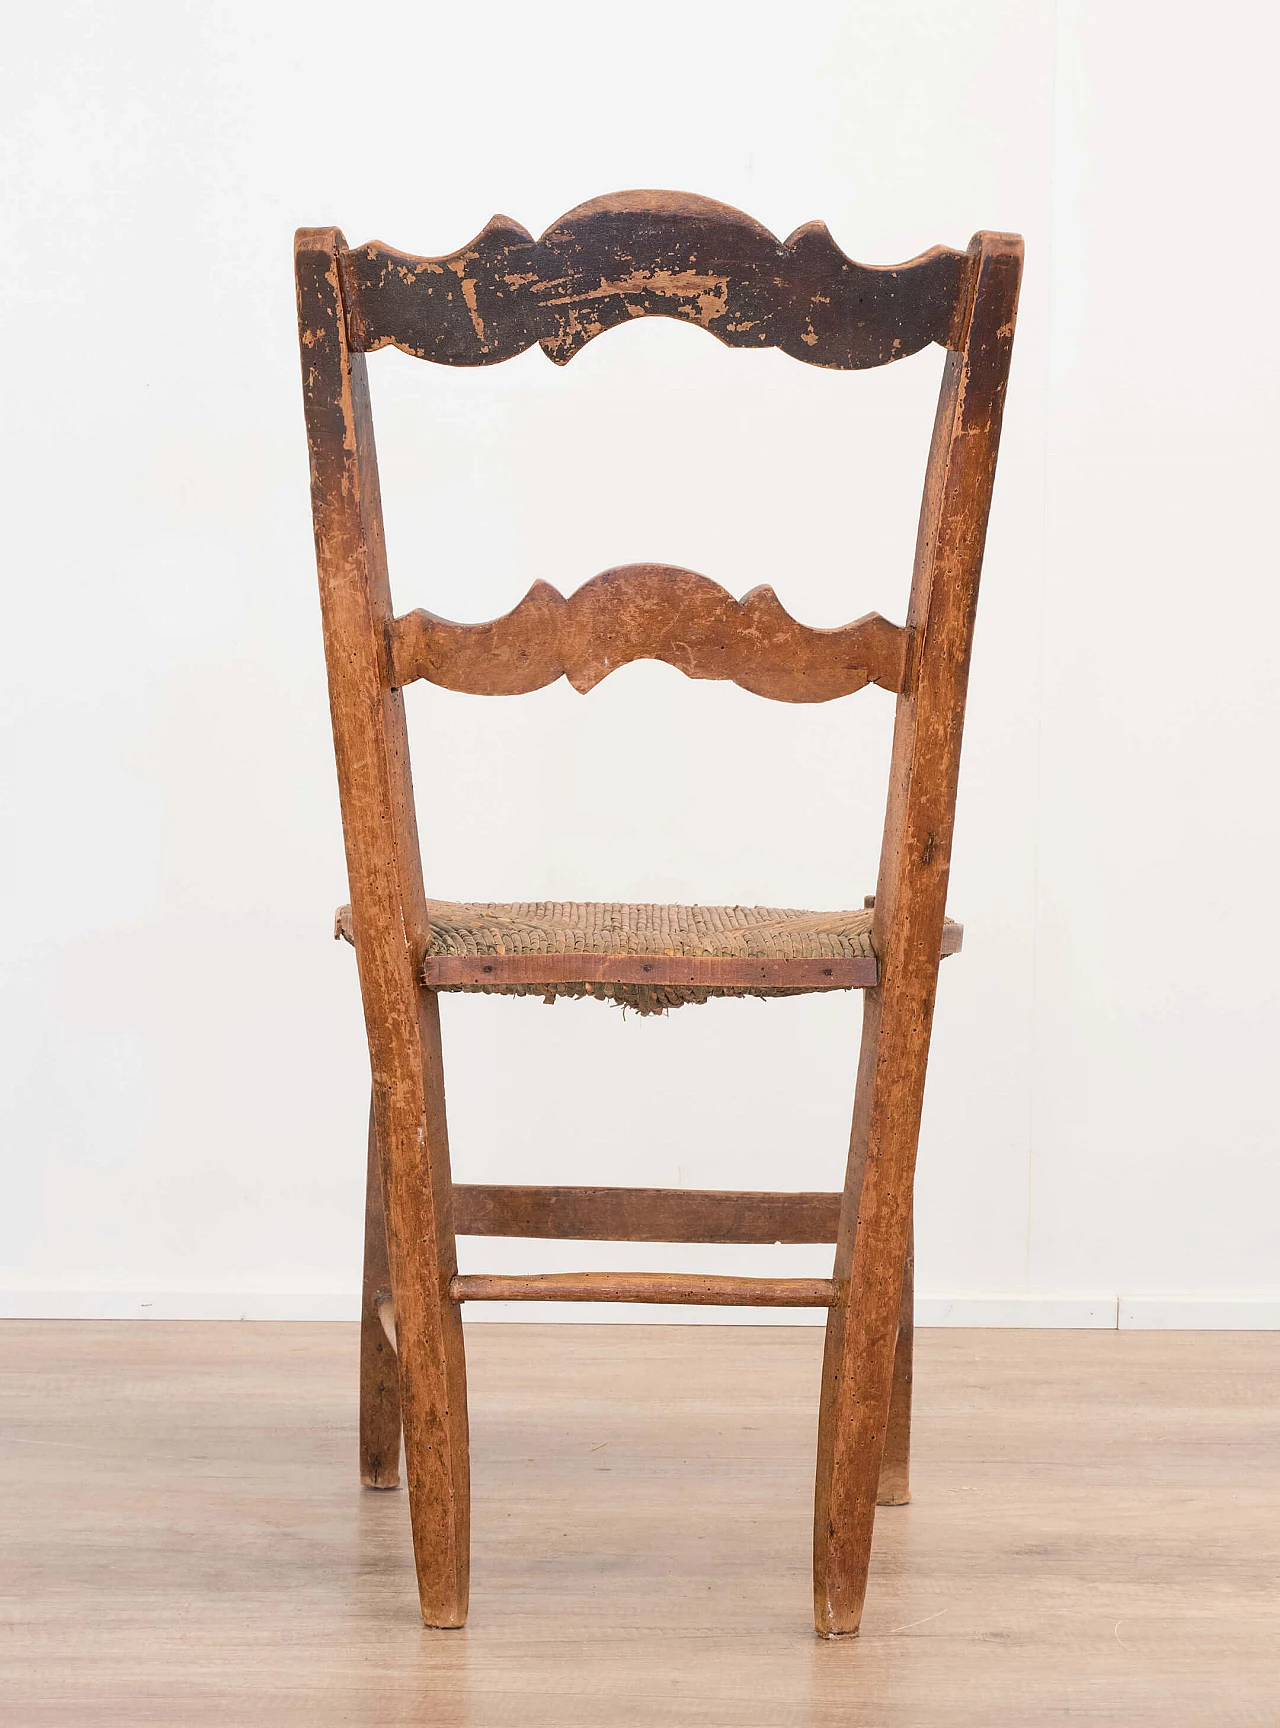 Rustic chair with sabre legs 1084744